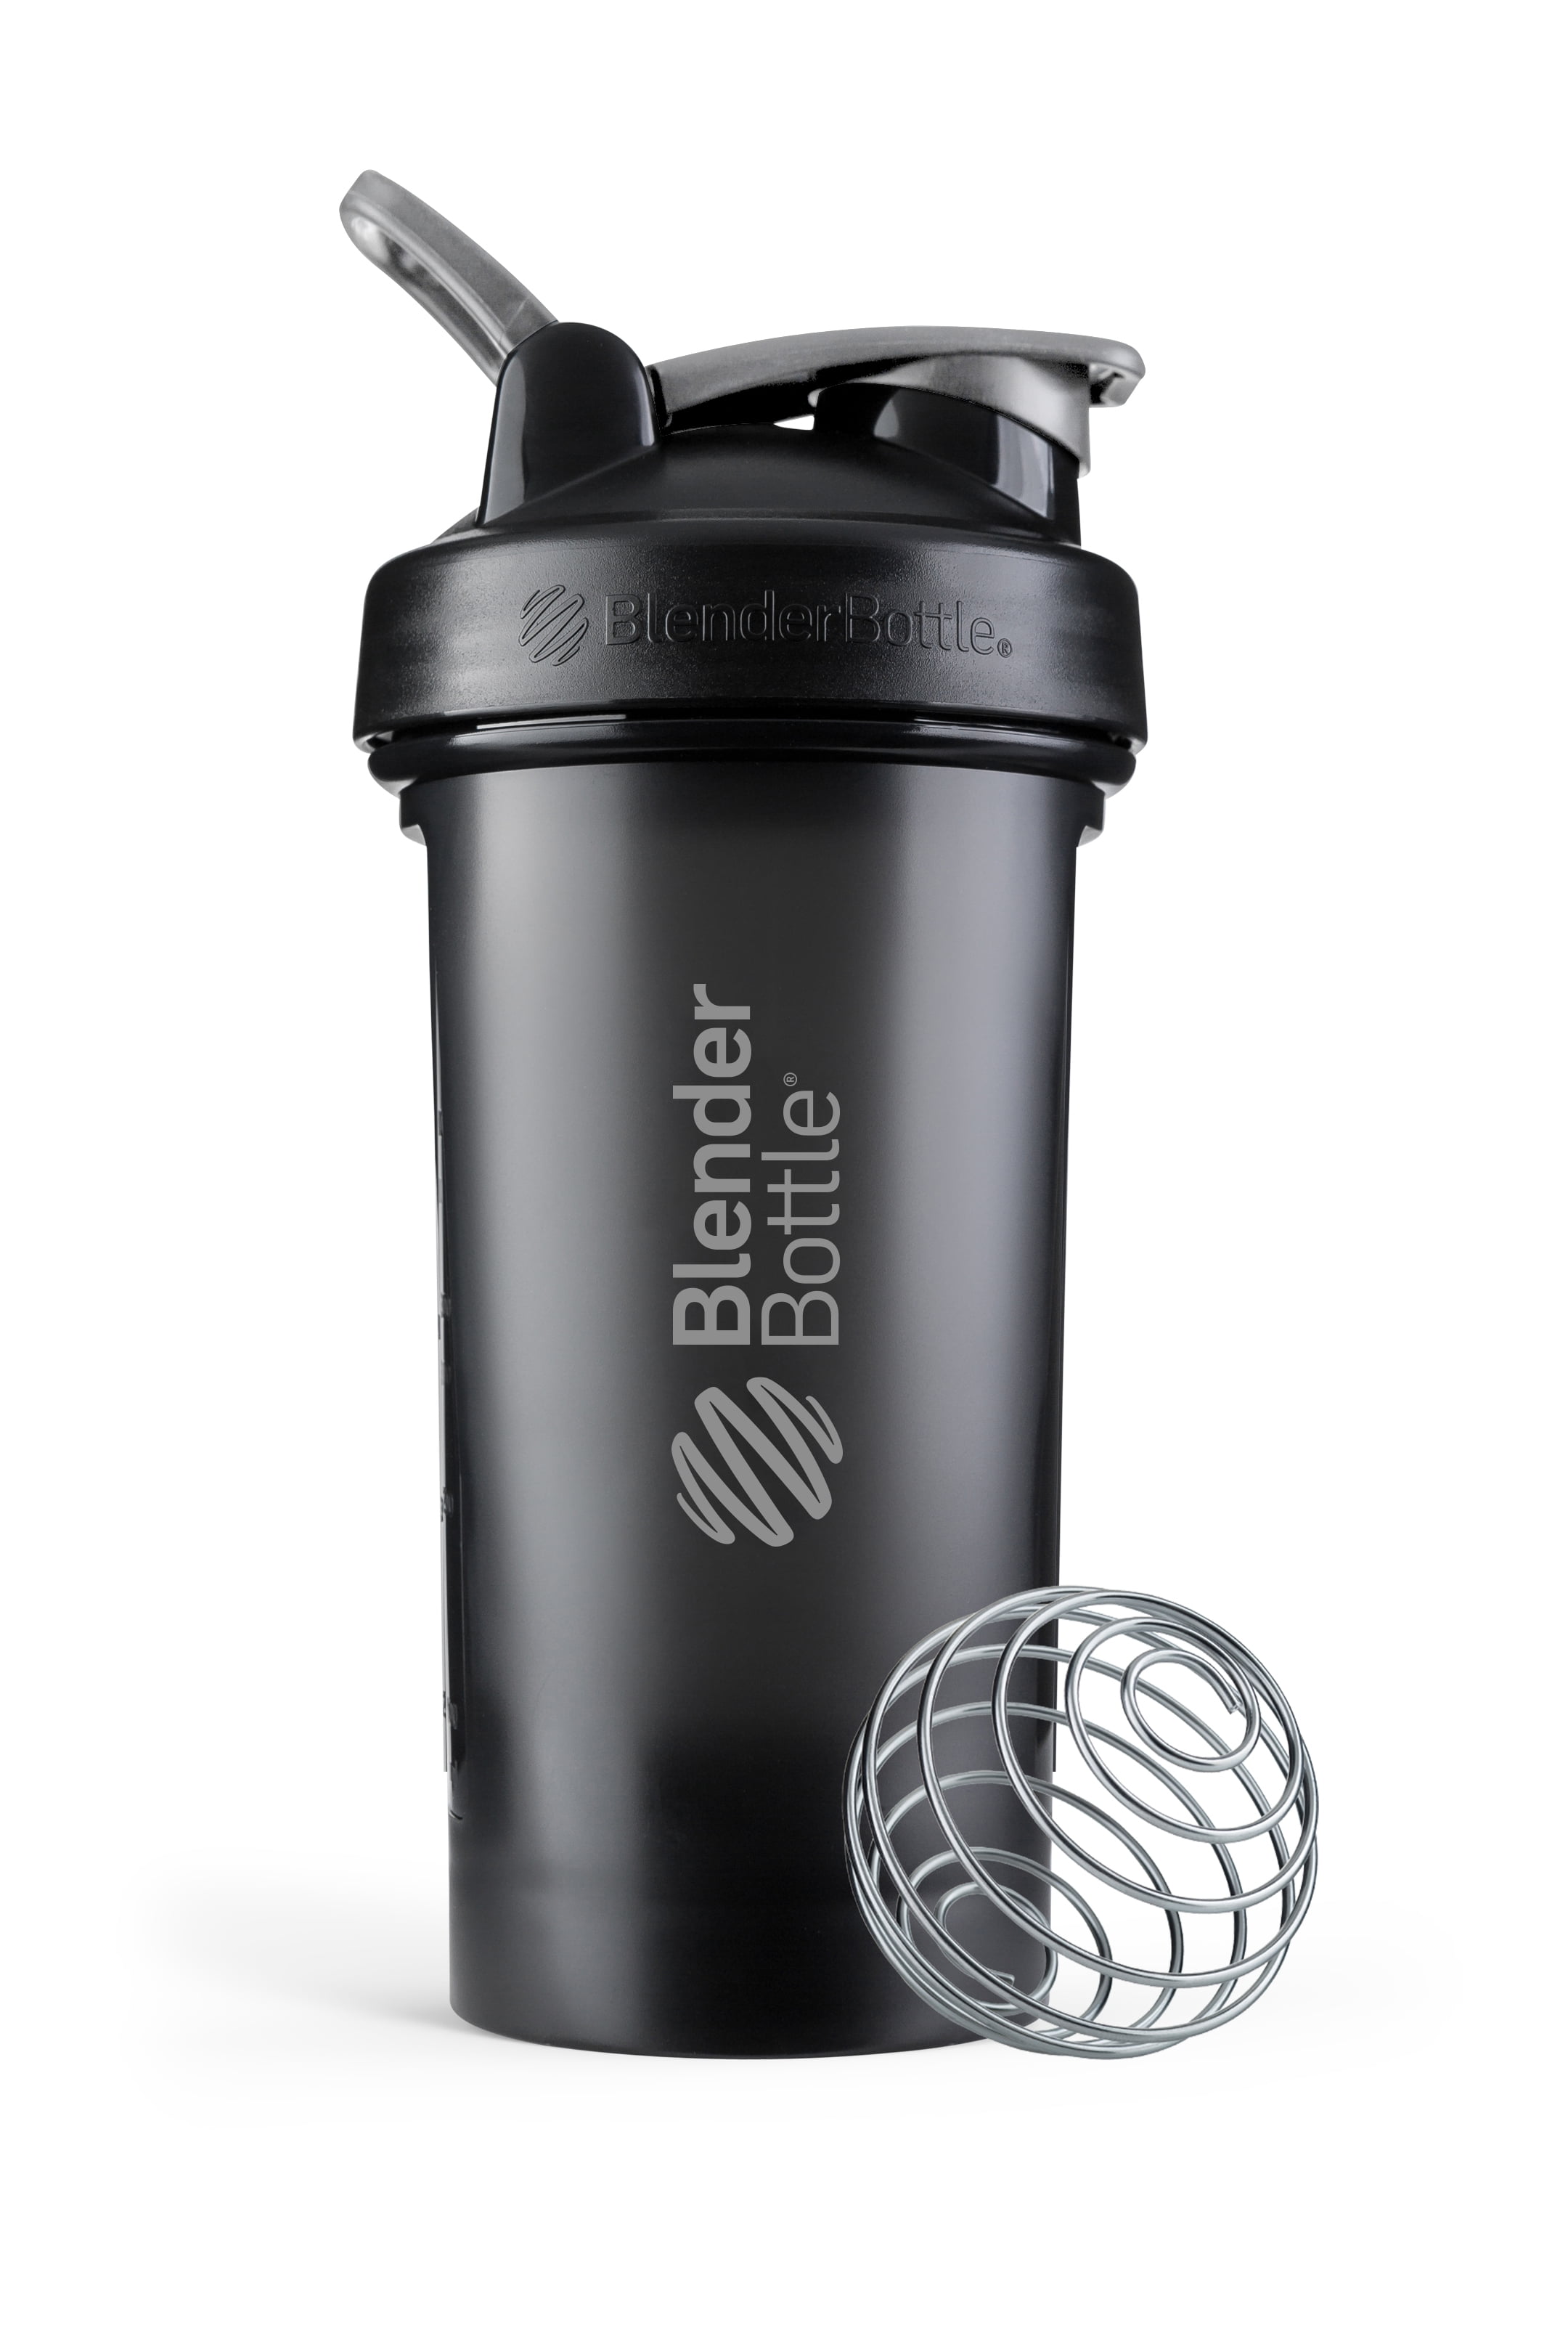 Up To 58% Off on 24-Oz Shaker Bottle Classic P